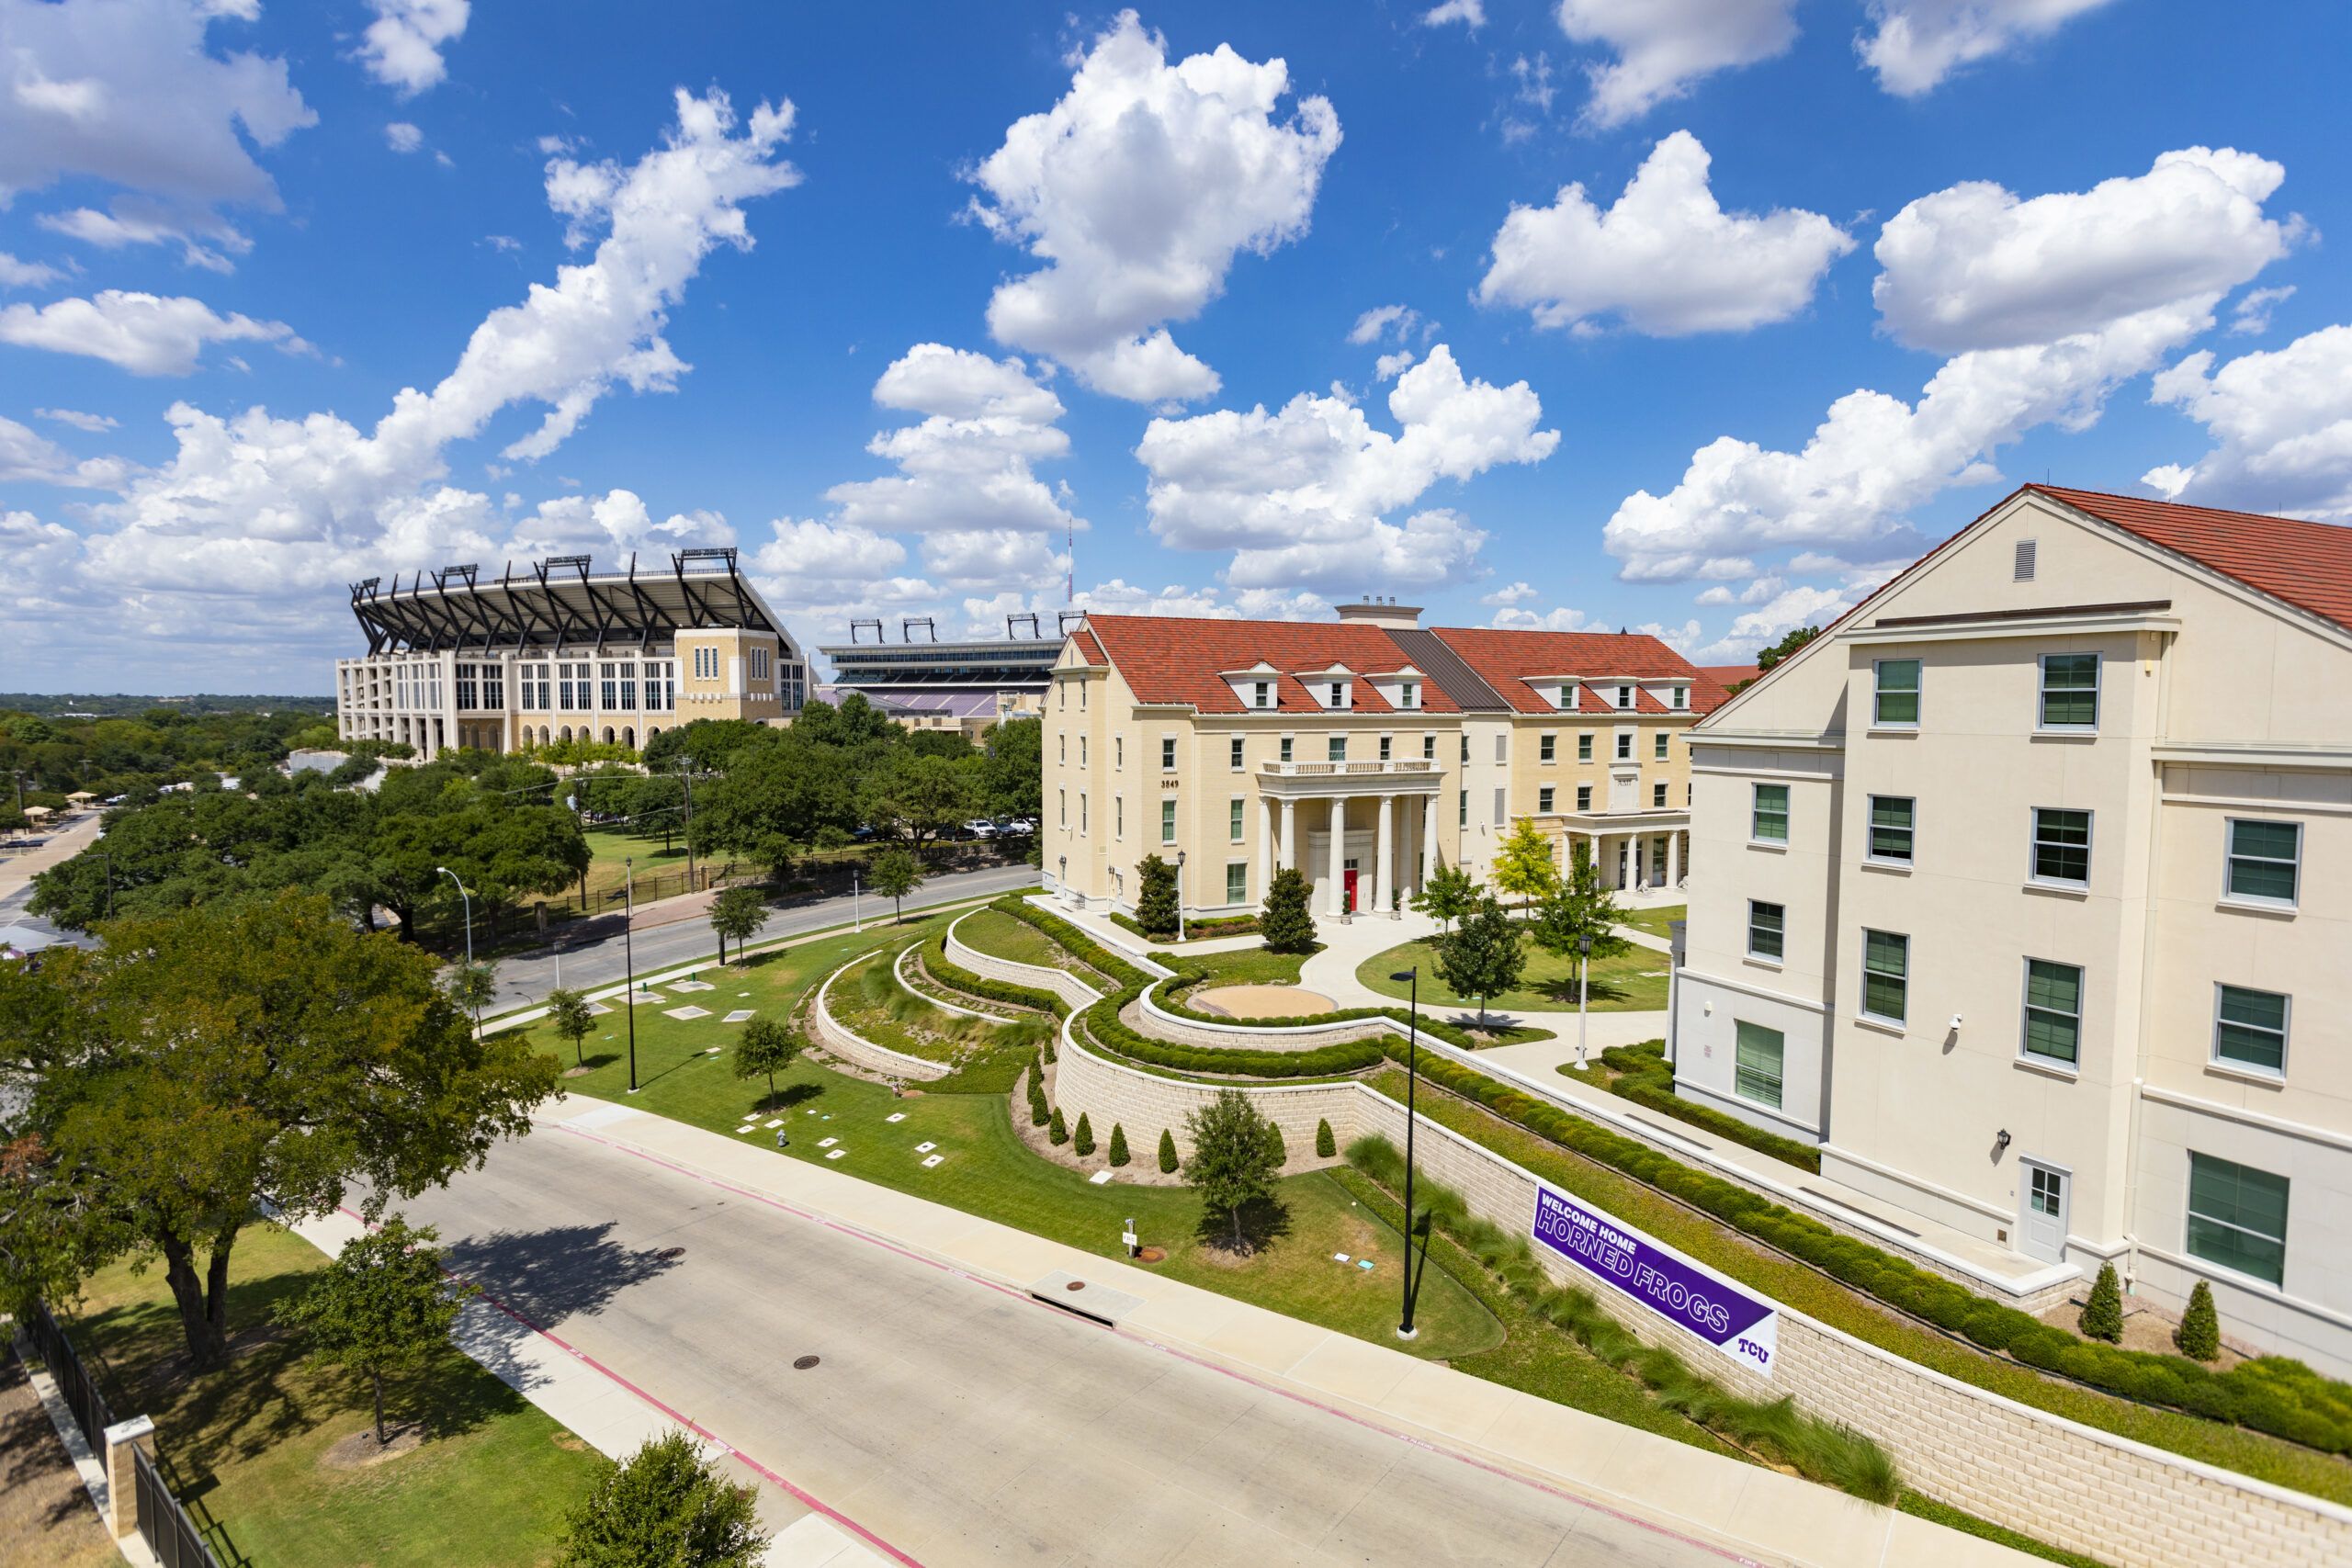 A view of the Greek Village from the top of the Worth Hills parking garage. Worth Hills Village is a residential community for Greek Life on campus with housing, dining and study lounges. (Heesoo Yang/TCU 360)